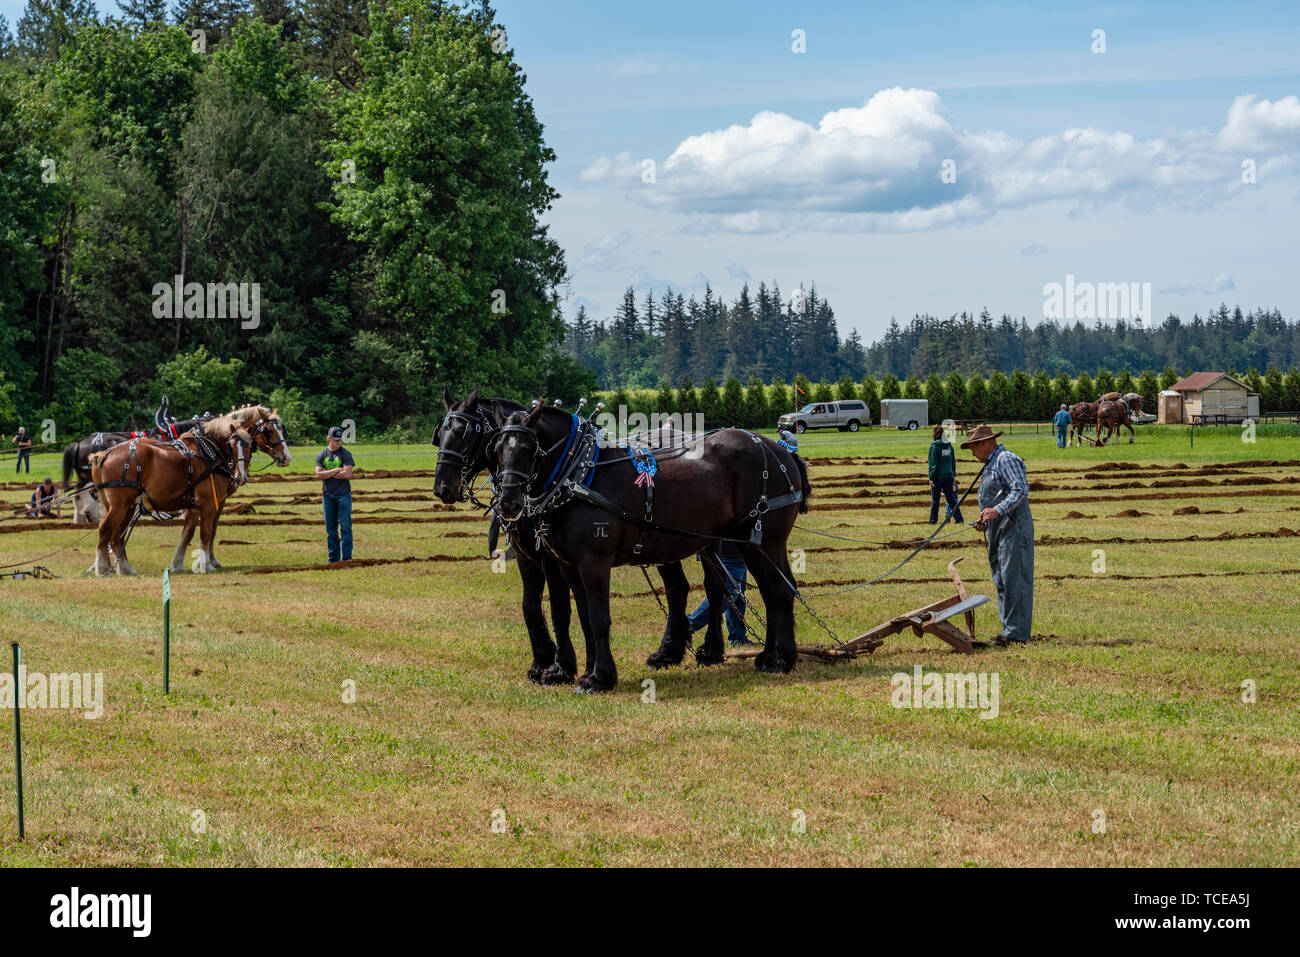 Teams of horses competing in the plowing match.  2019 International Plowing Match.  Berthusen Park, Lynden, Washington Stock Photo